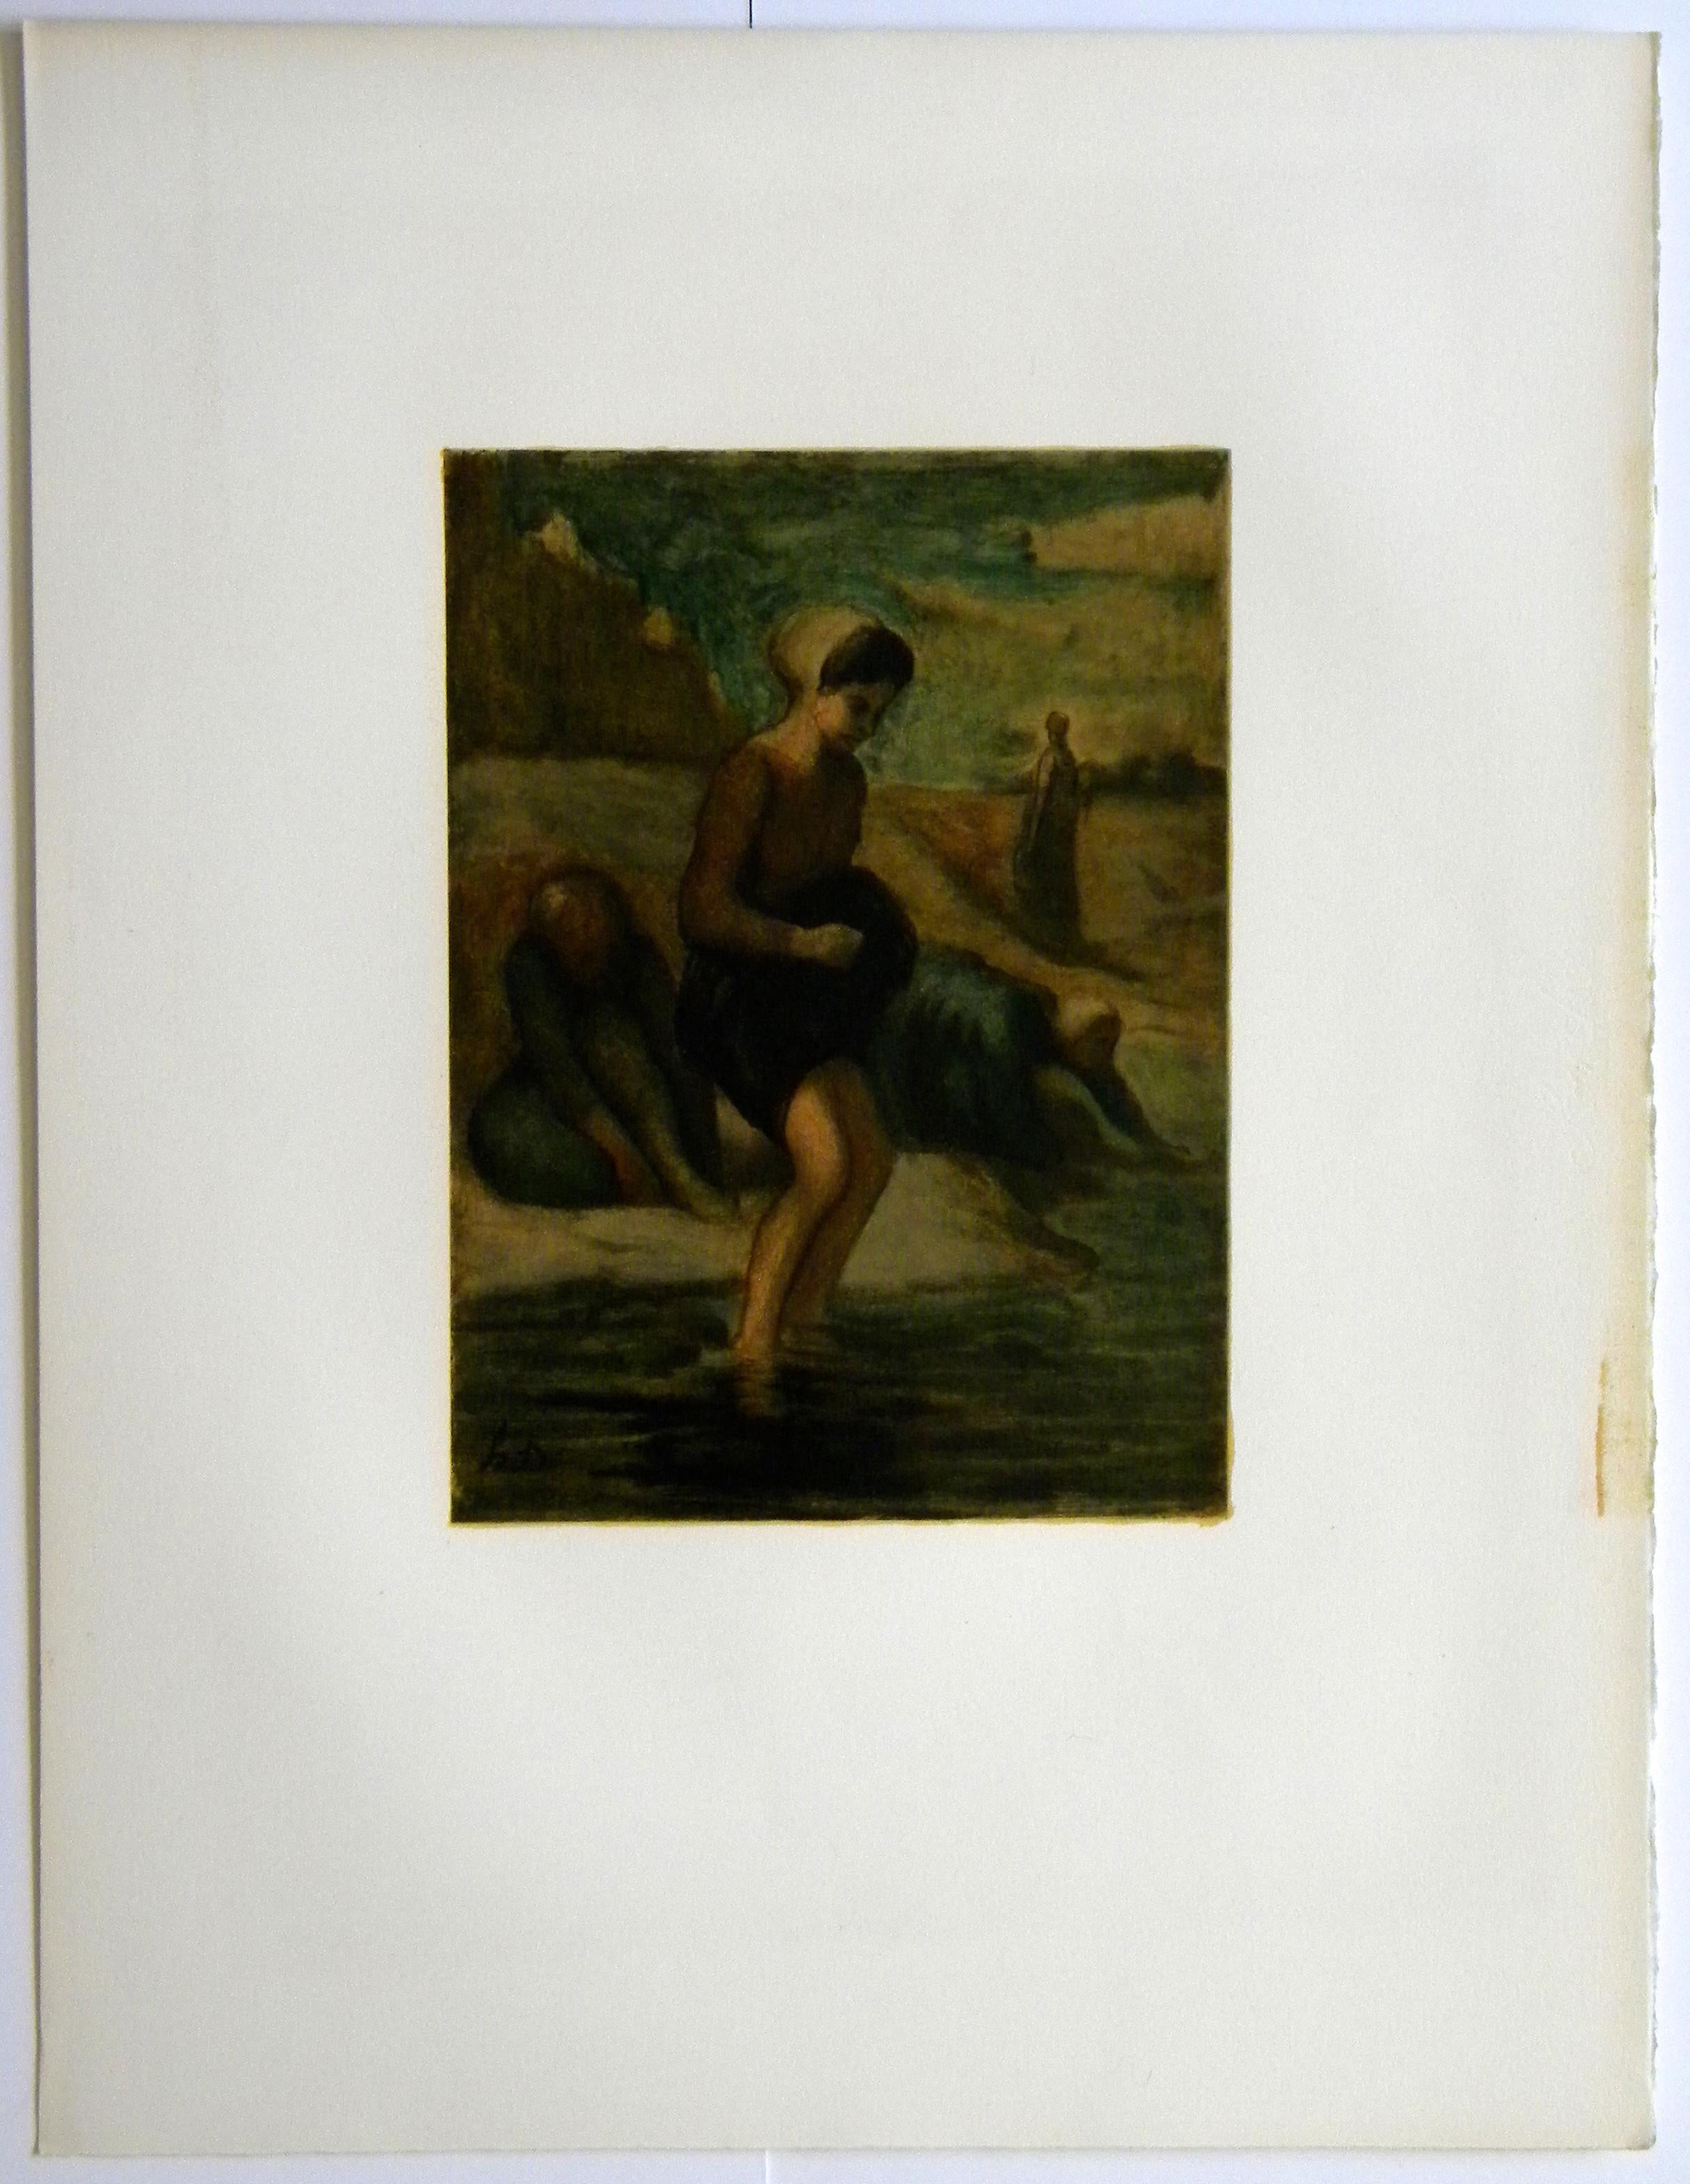 Medium: lithograph (after the Daumier painting). Printed in Paris on Arches paper at the Mourlot studio in 1973 in an edition of 1000 for the Collection Pierre Lévy deluxe portfolio. The image measures 13 x 9 1/2 inches (330 x 240 mm) and the full